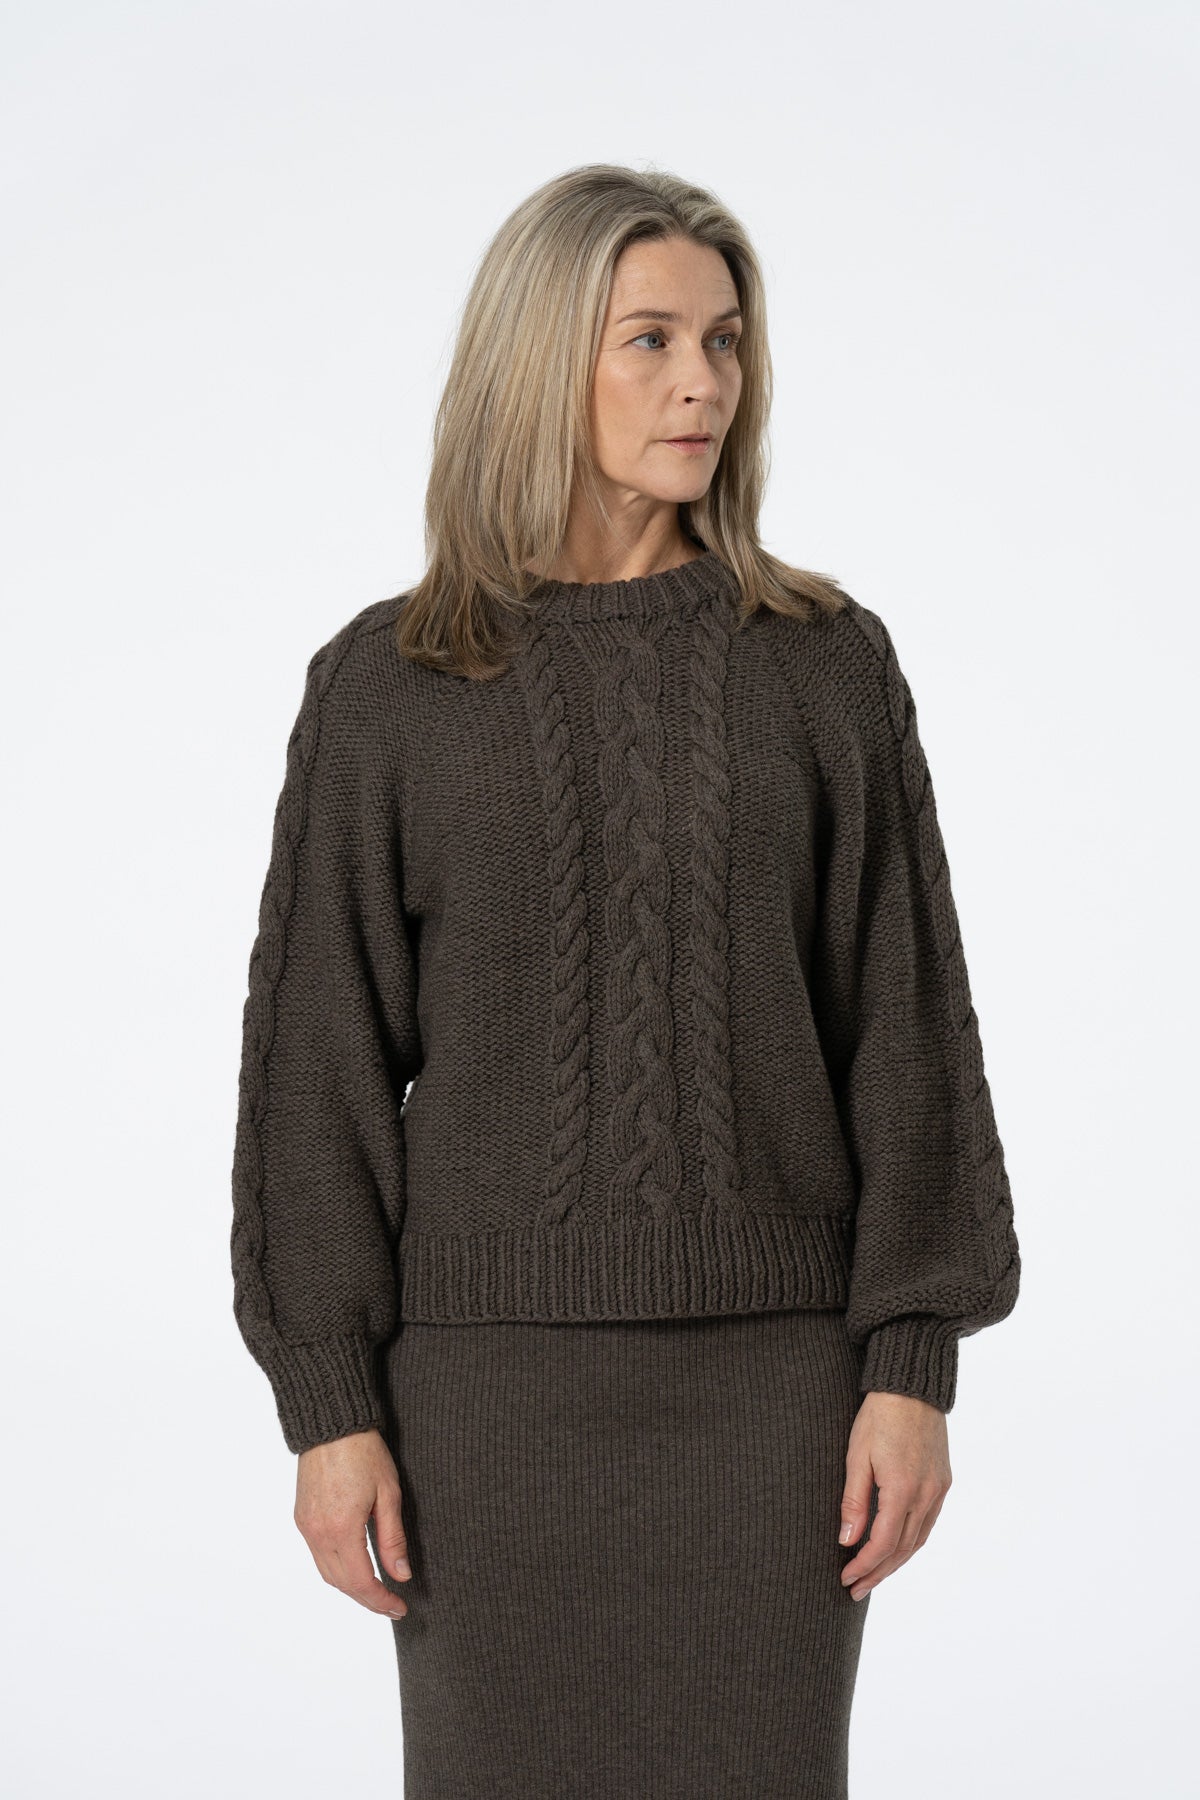 Merino Handknit Cable Sweater in Mulch Brown Fall 23/24